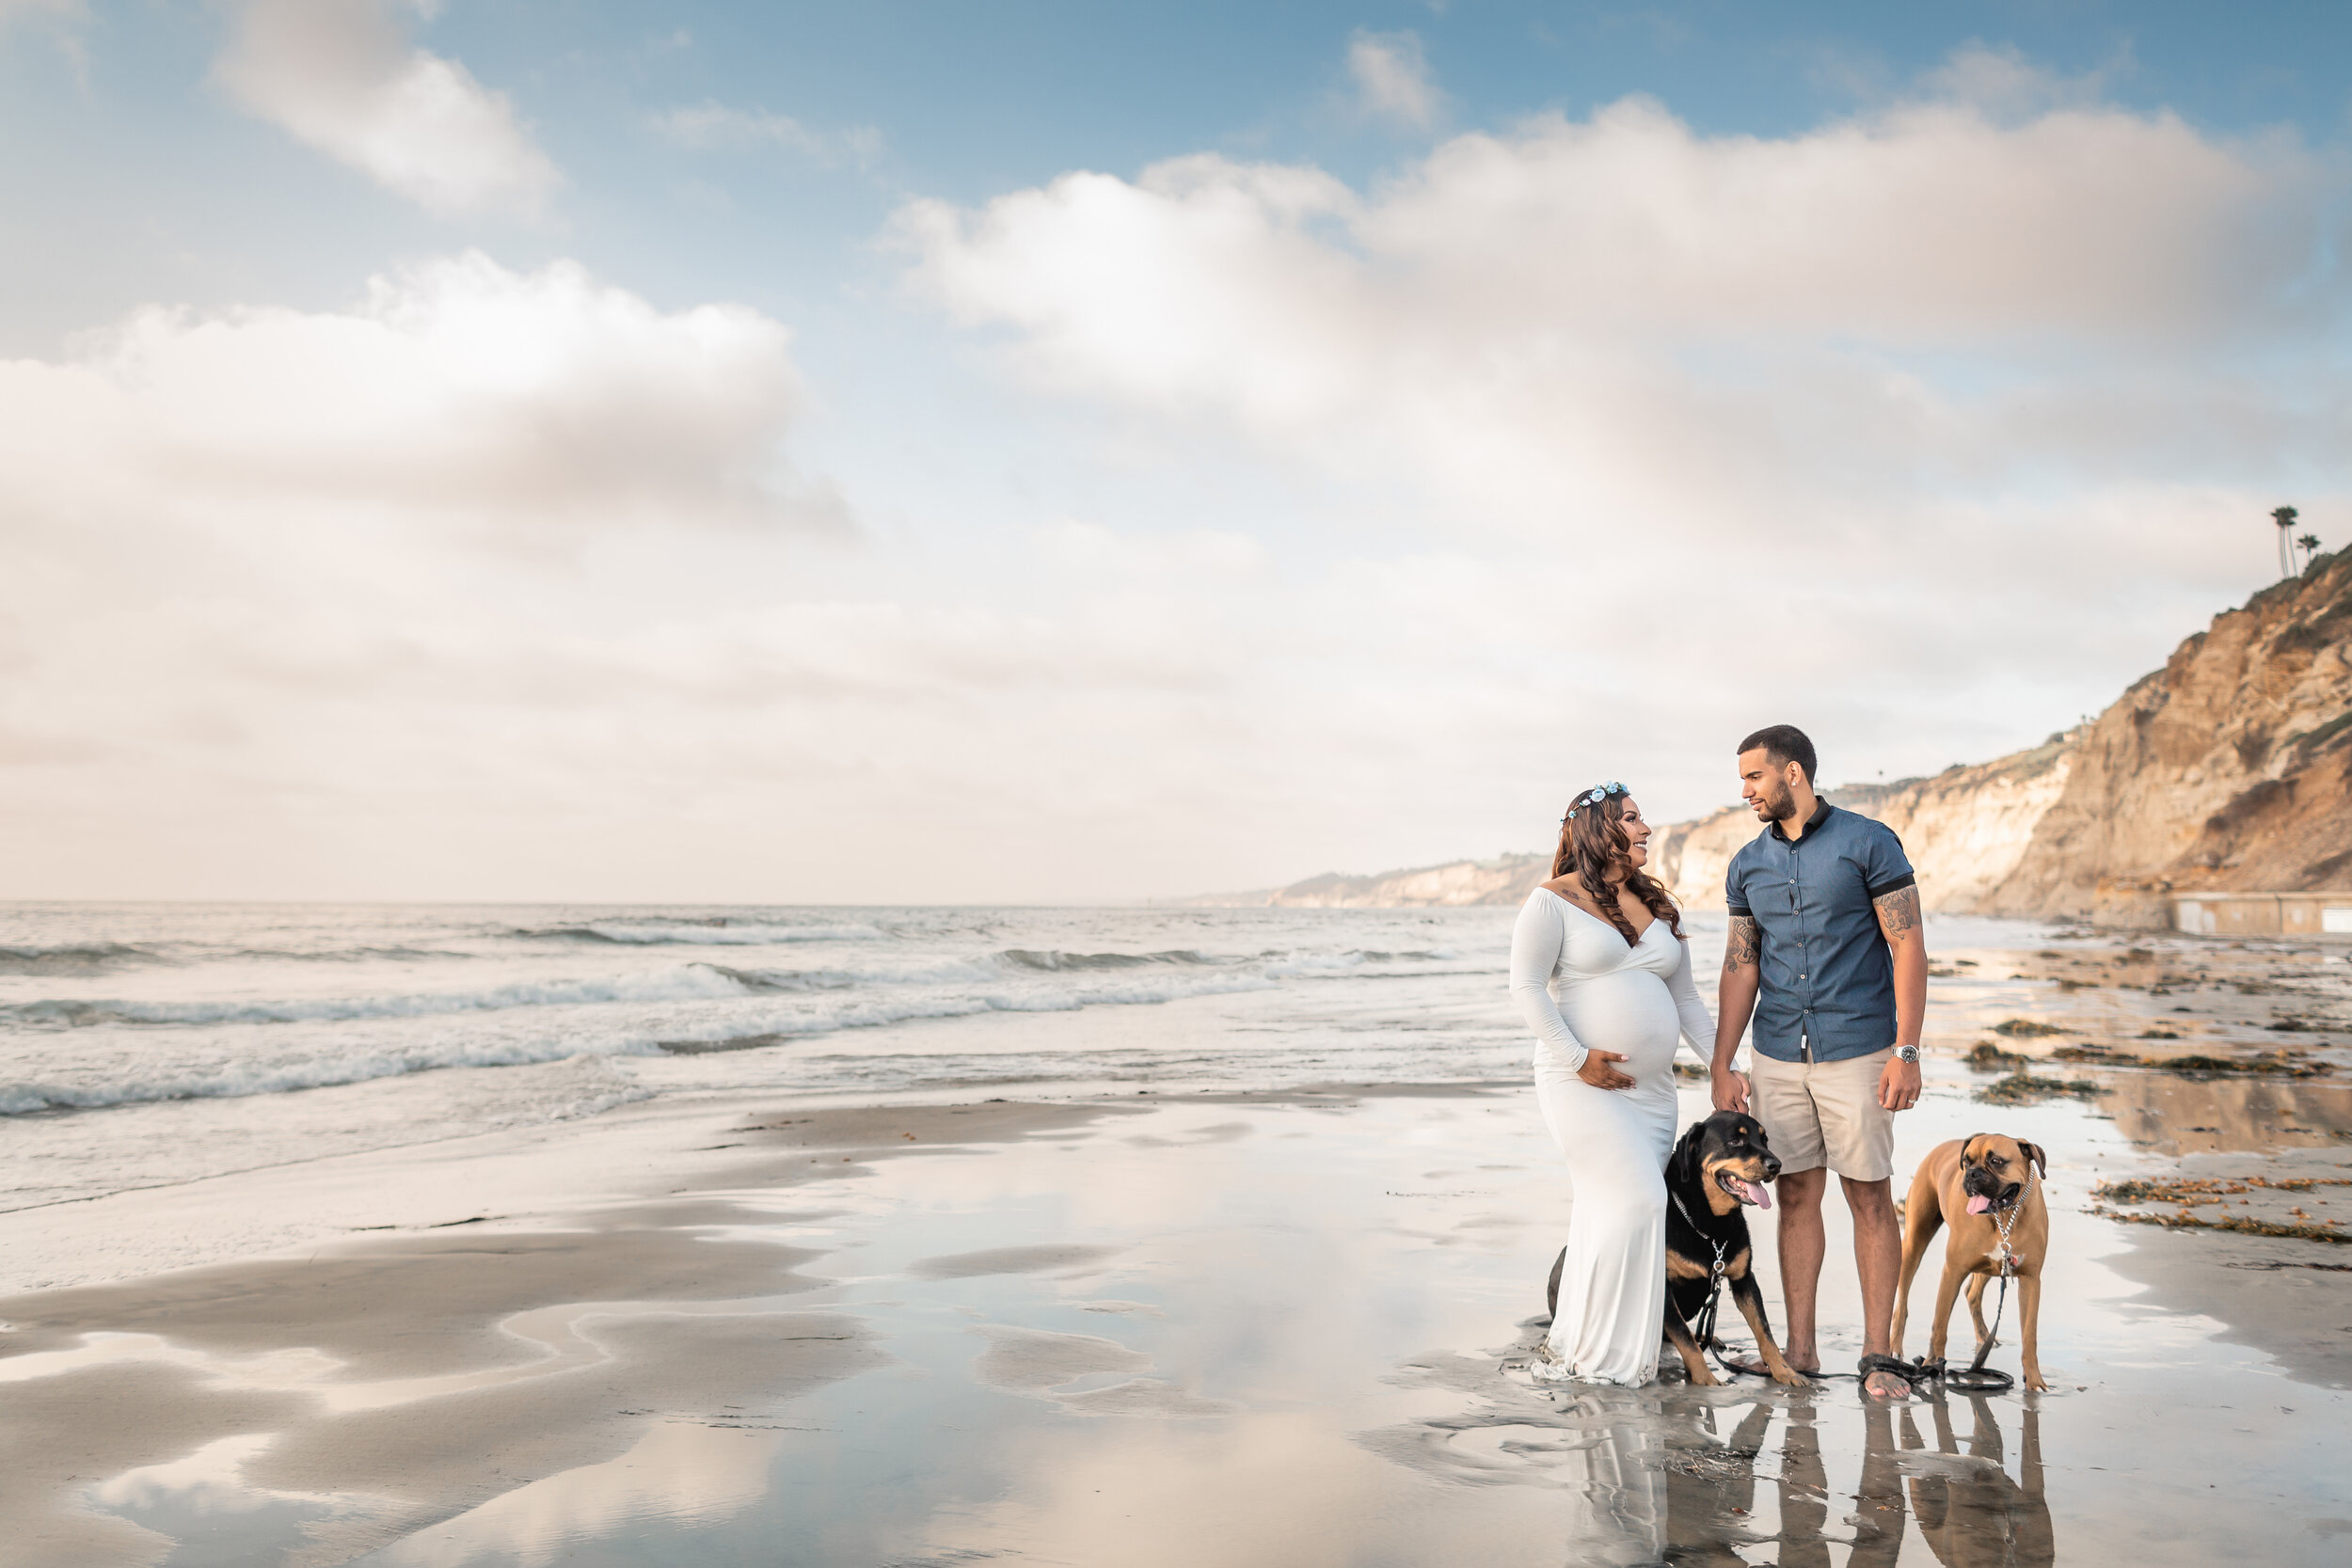 La Jolla Shores Beach Maternity Session with Dogs